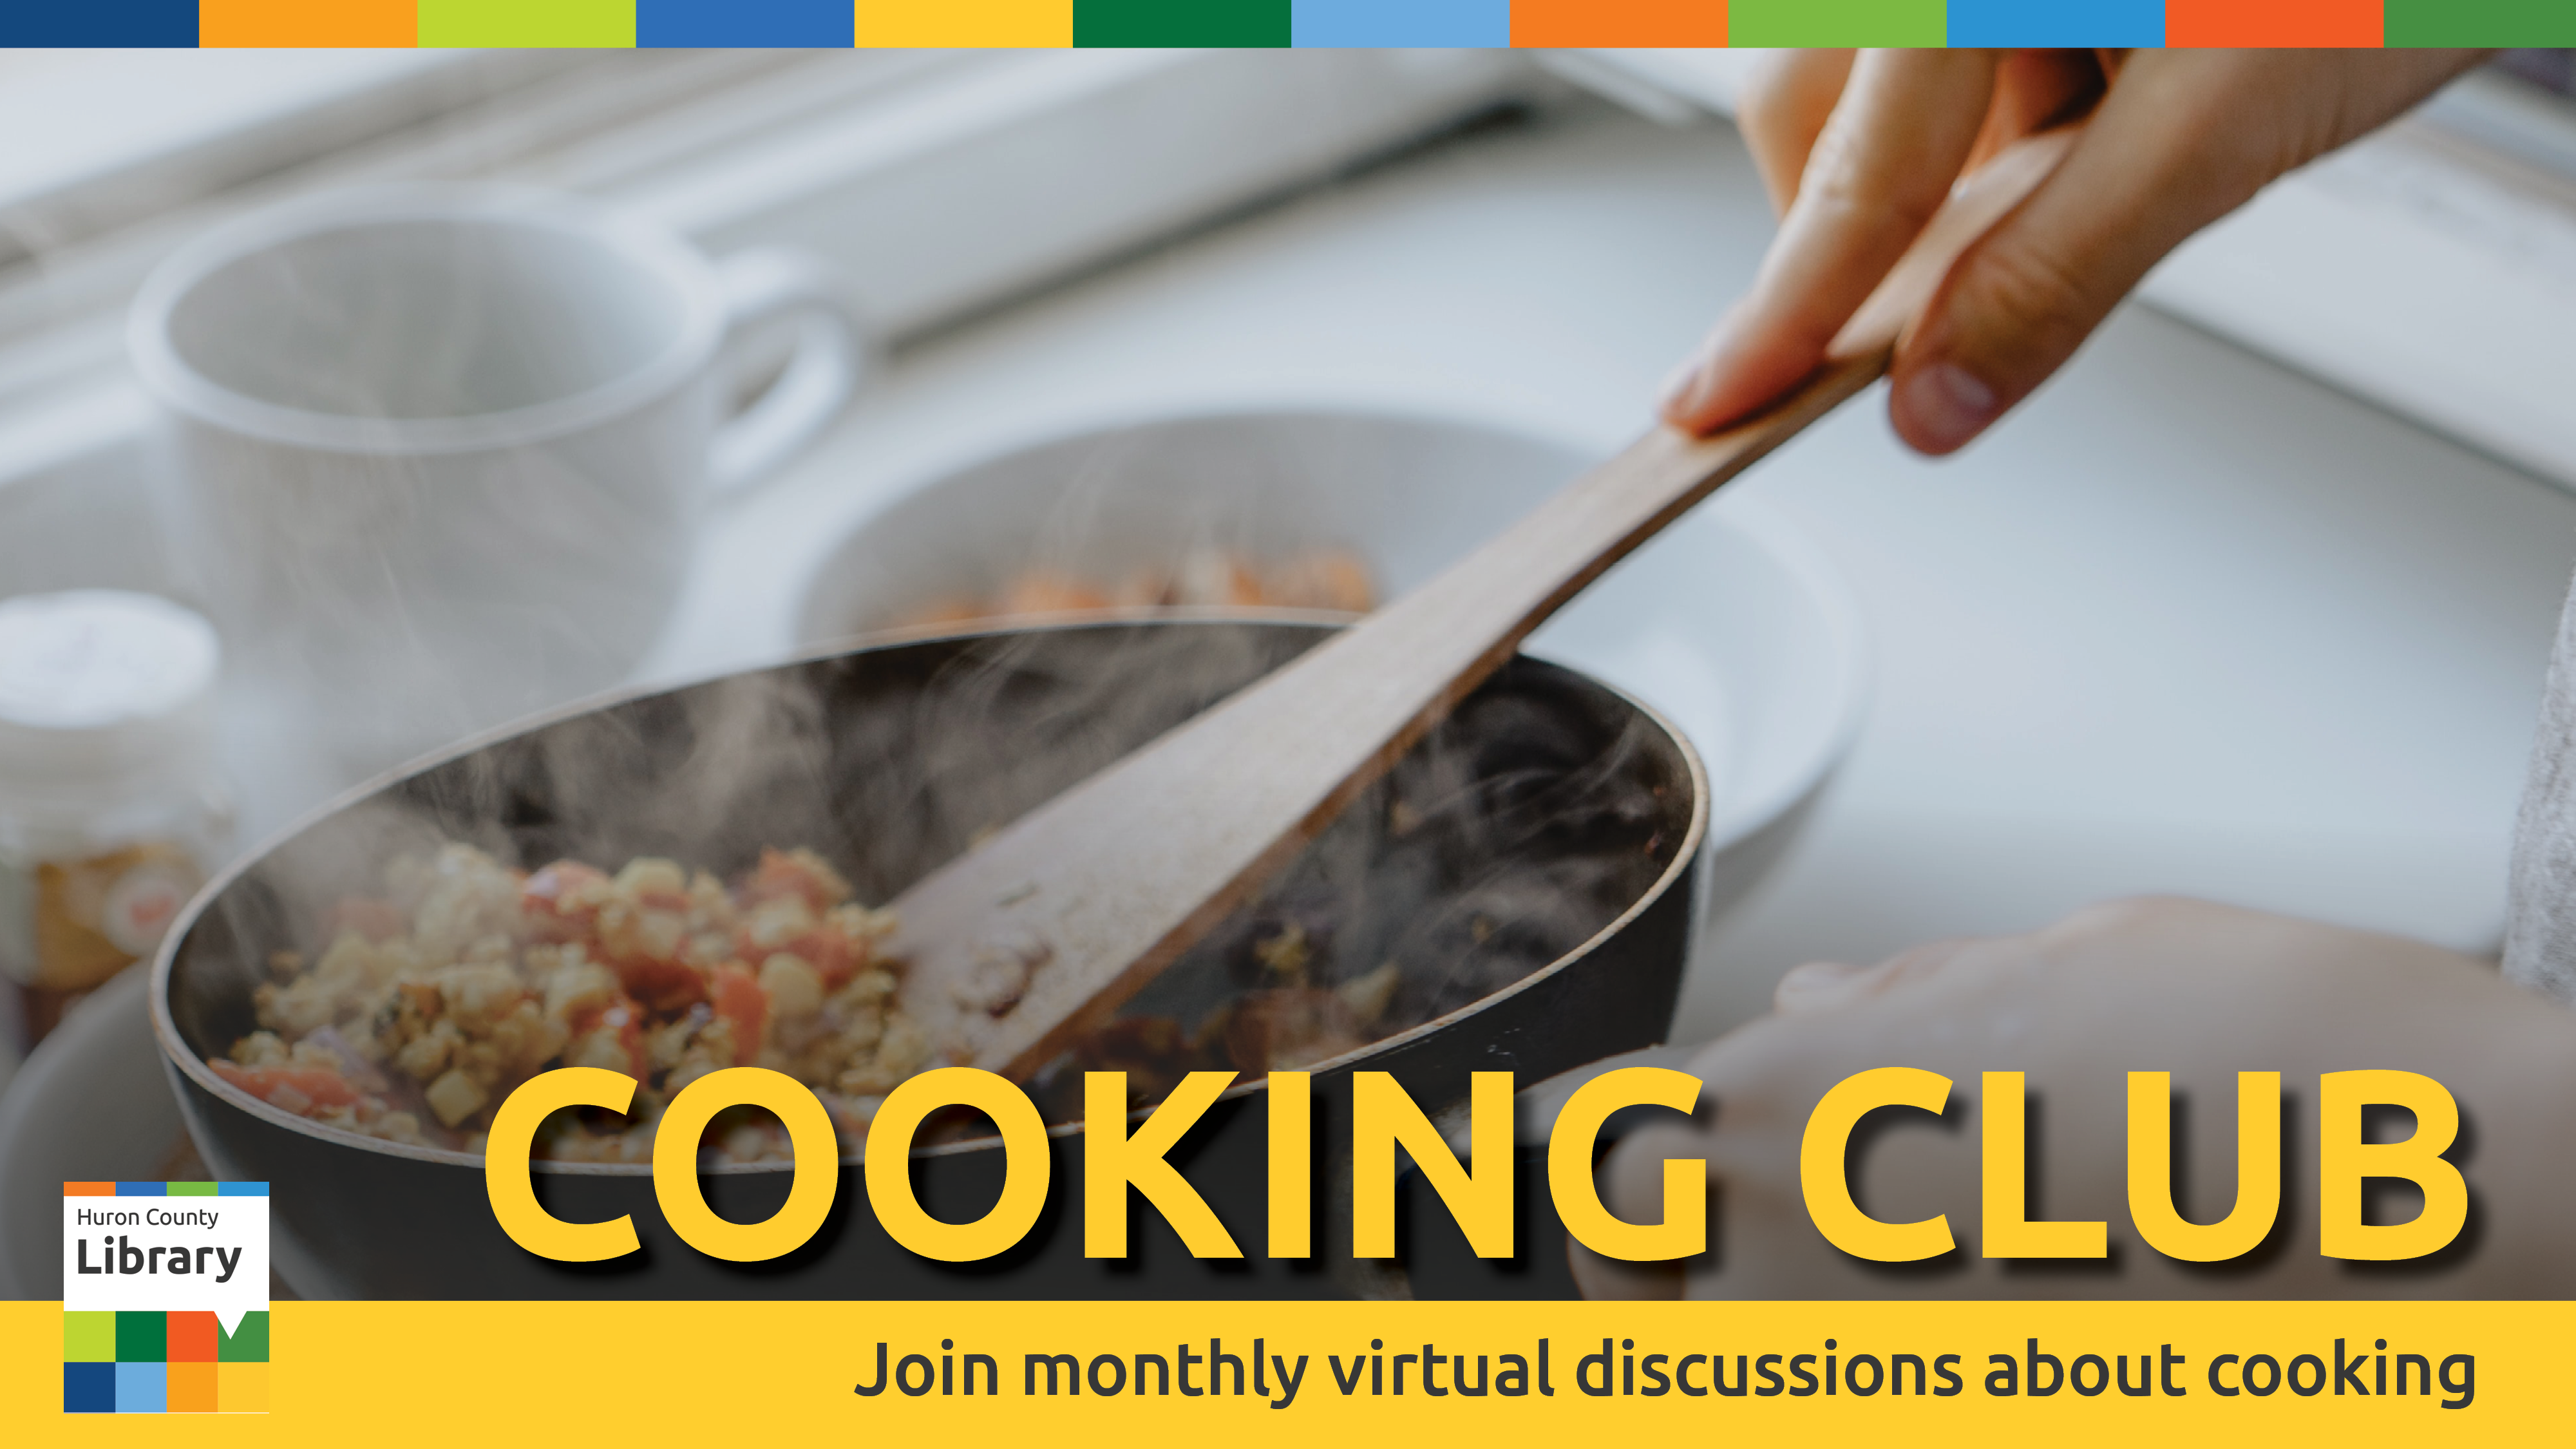 Image of someone cooking on a stove with text promoting virtual cooking club